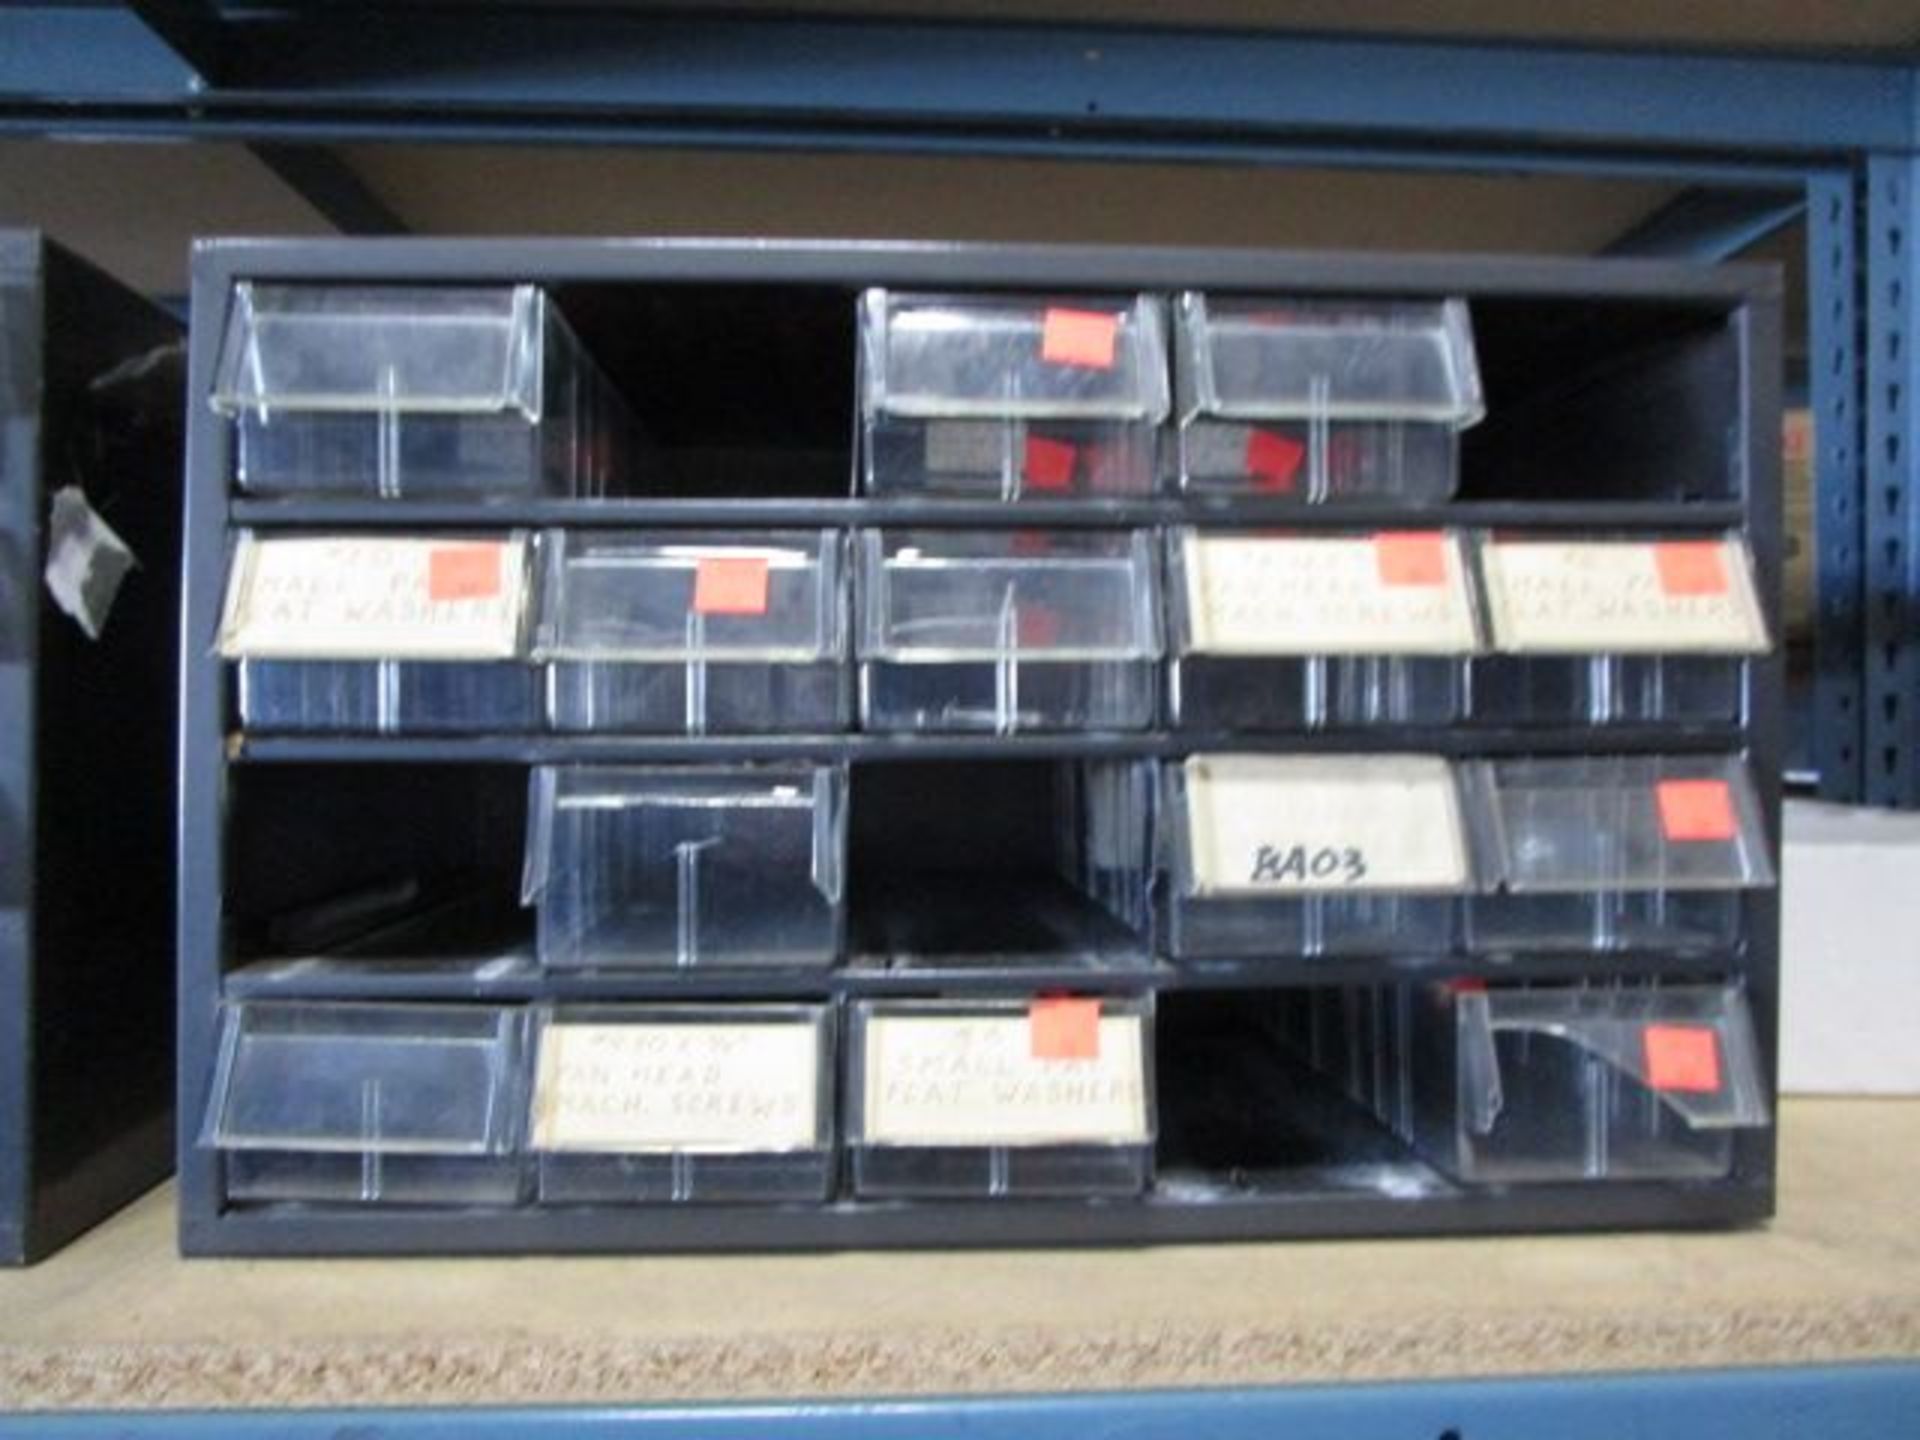 SHELVING UNIT OF SMALL STORAGE CONTAINERS AND MONITORS - Image 4 of 7